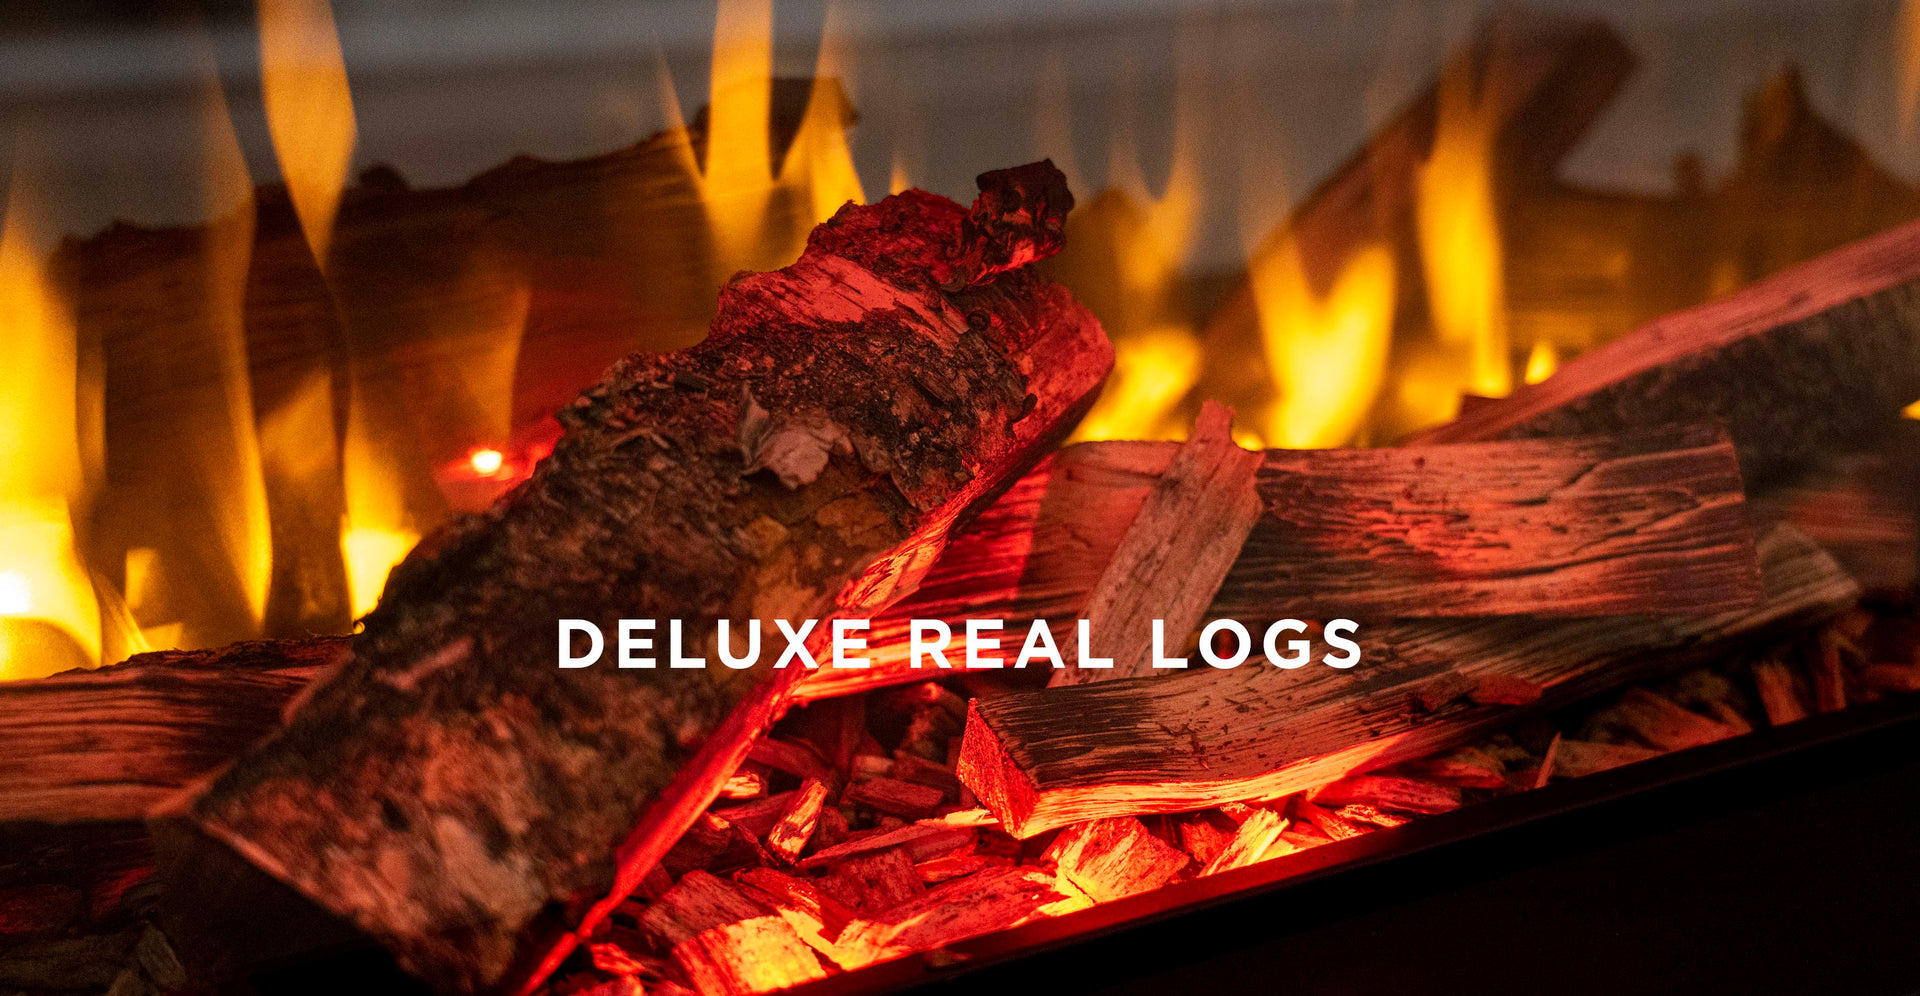 Load video: a video of the deluxe real logs which are available to purchase as part of the firez range